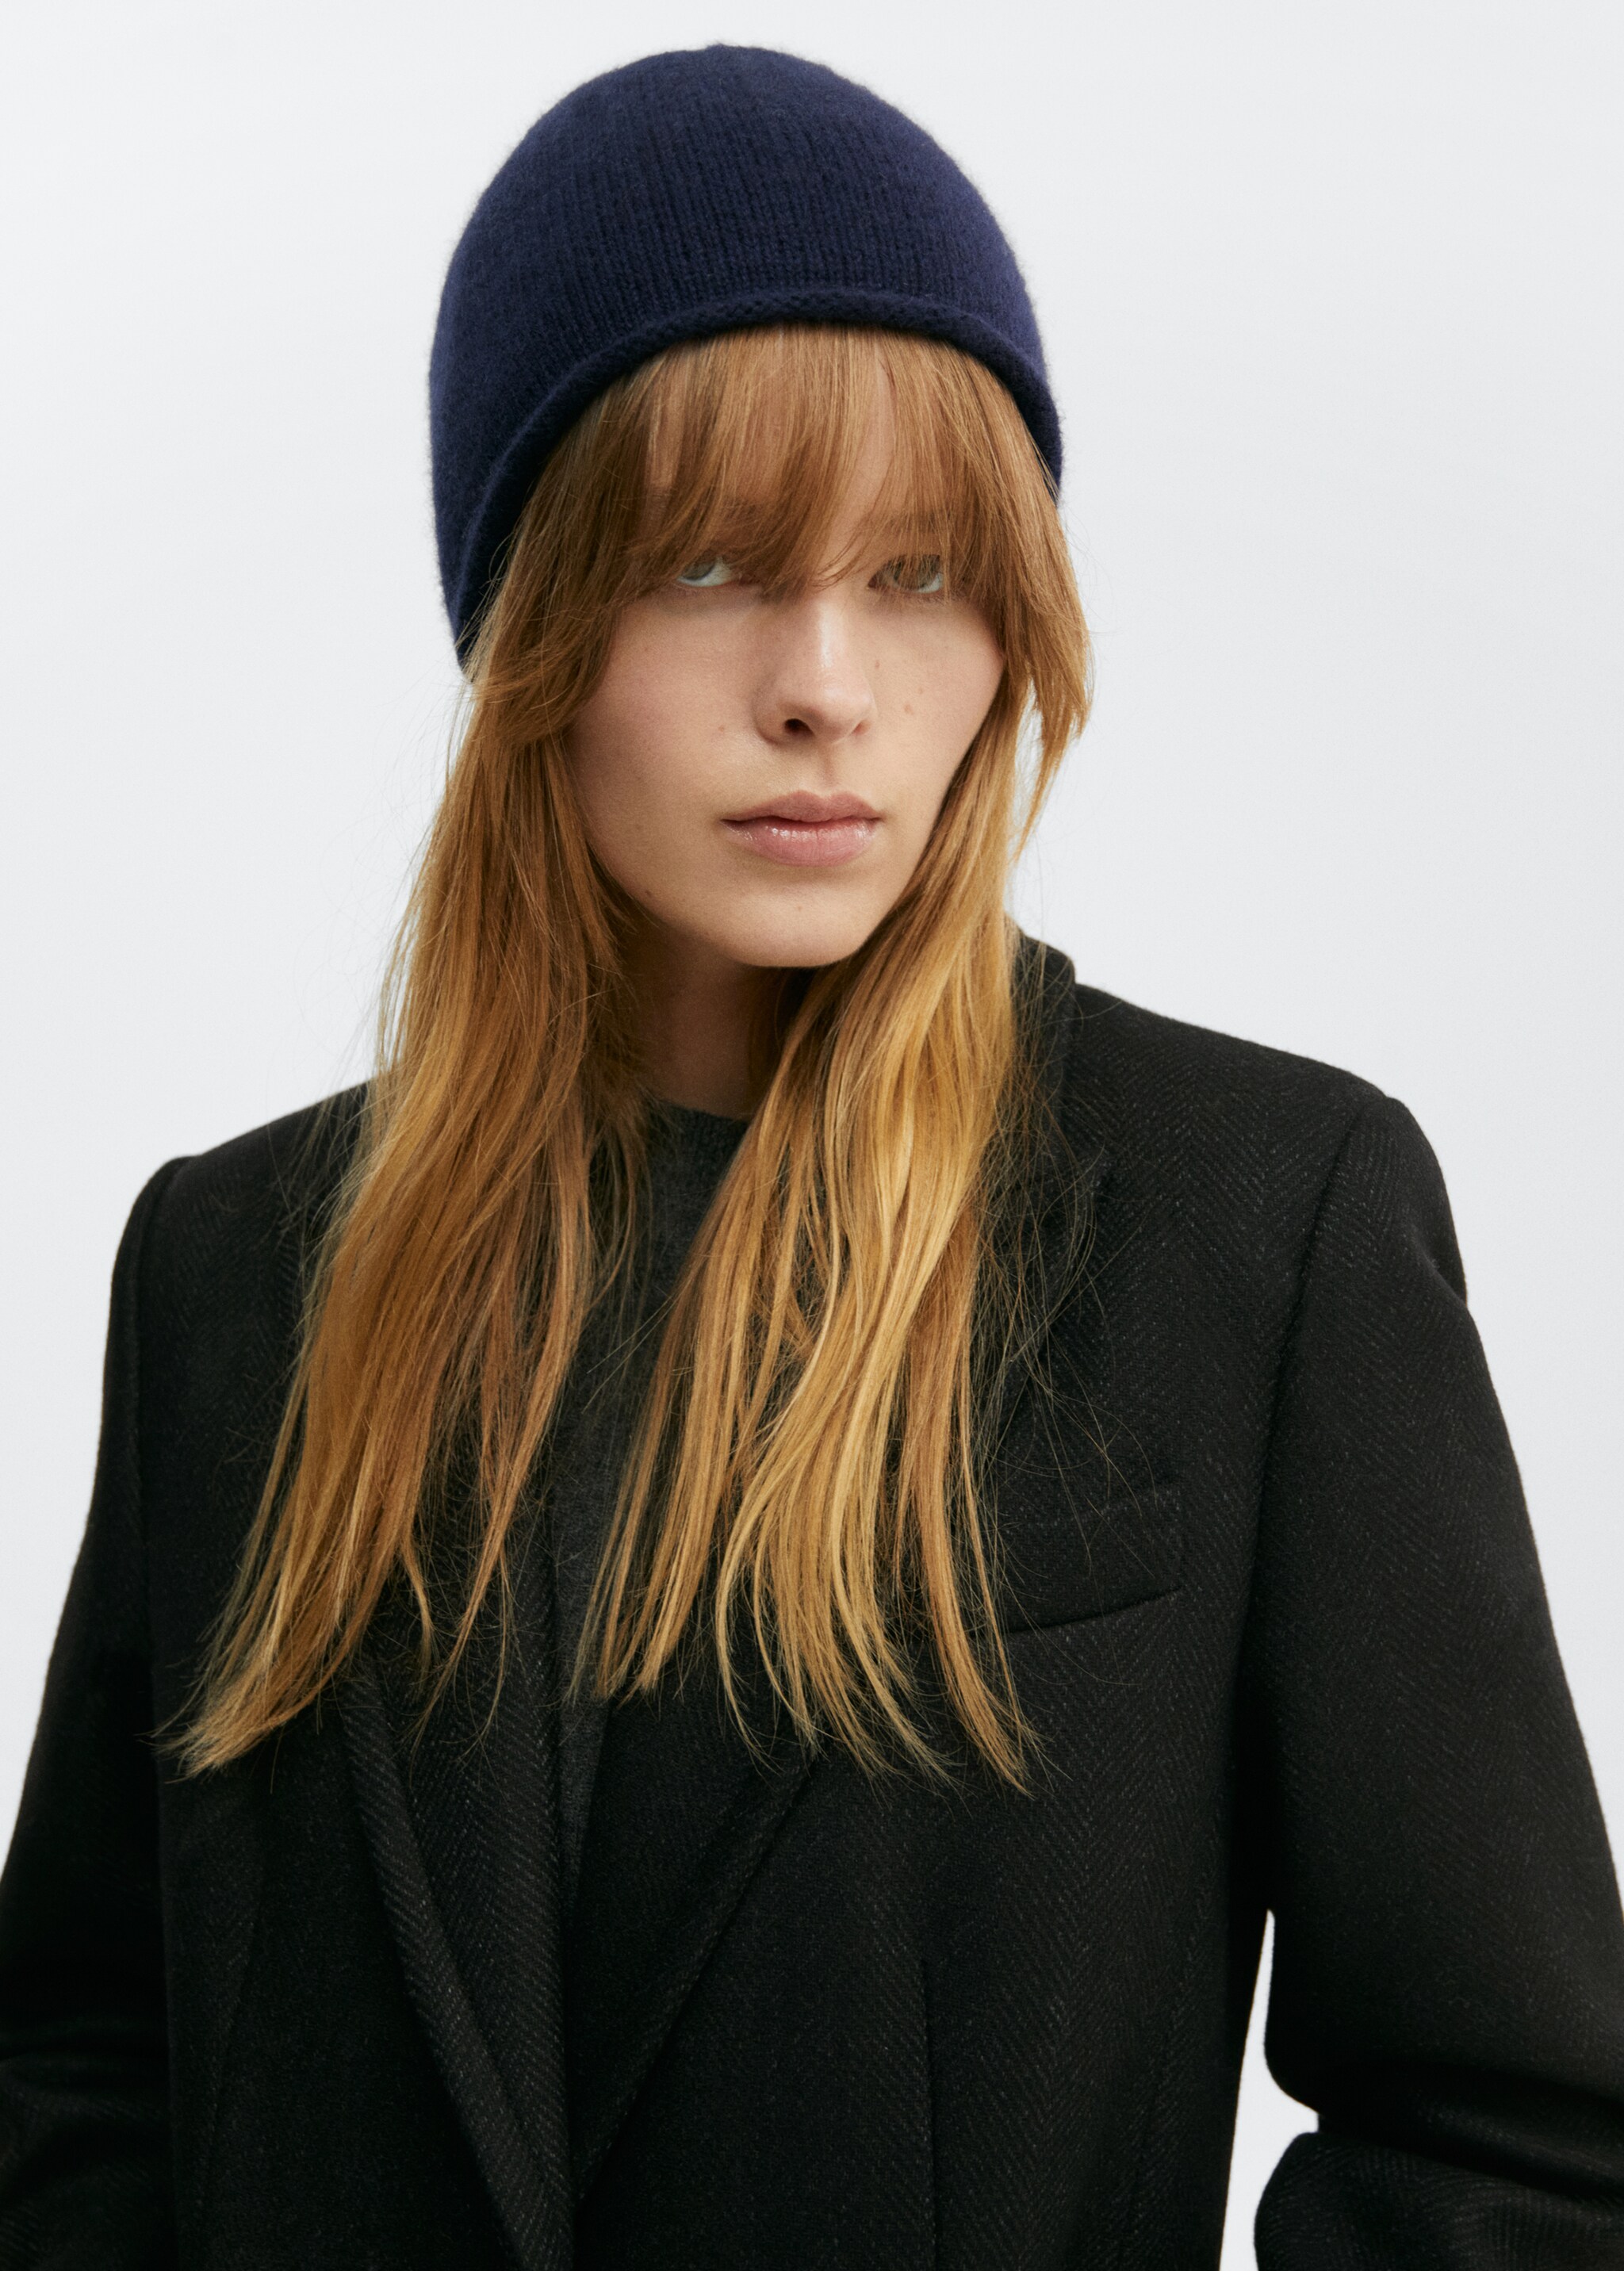 Cashmere knitted hat - General plane